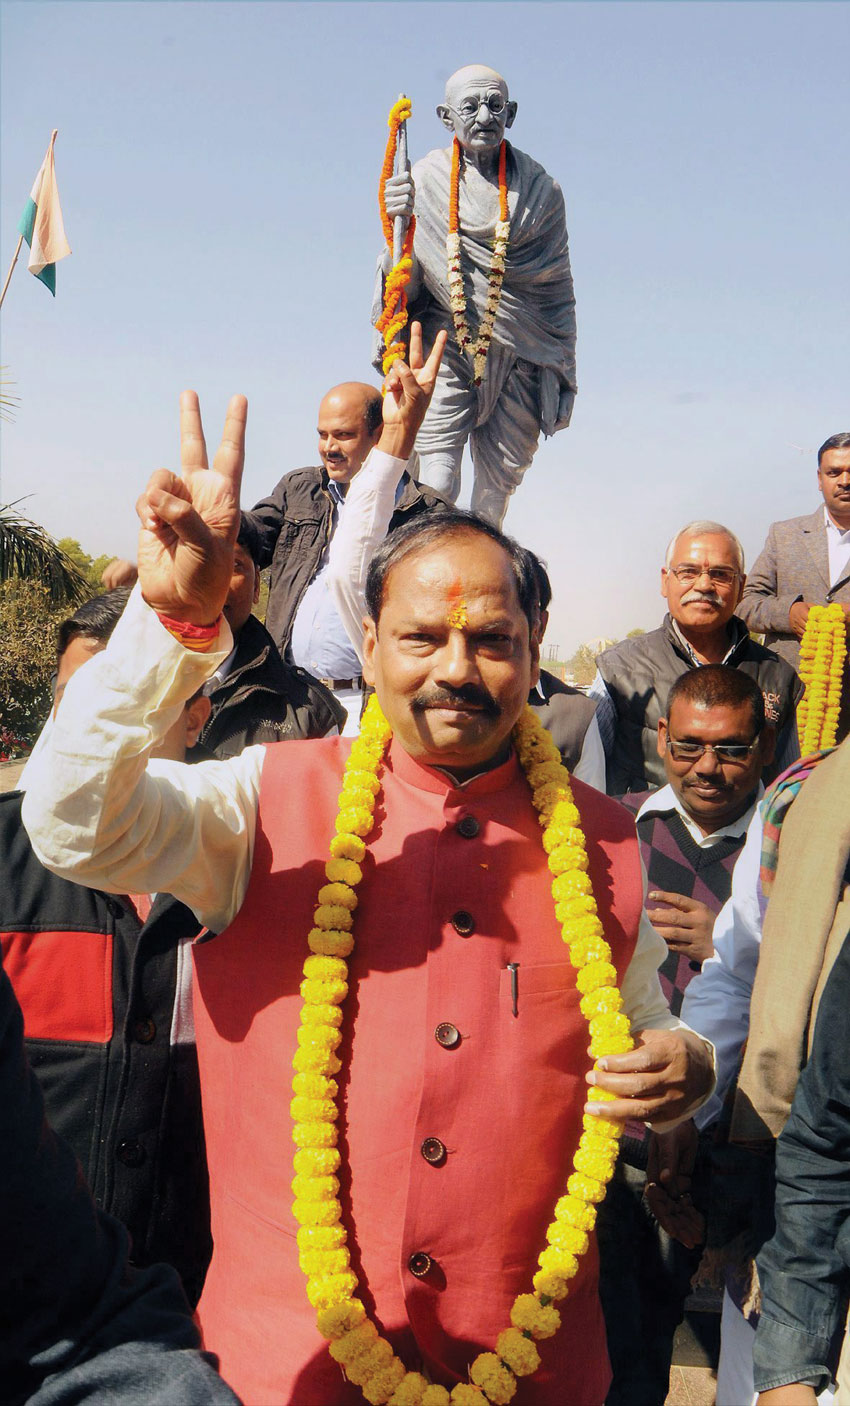 Jharkhand Chief Minister Raghubar Das flashes victory sign after taking oath at Morabadi Ground in Ranchi. (Press Trust of India)